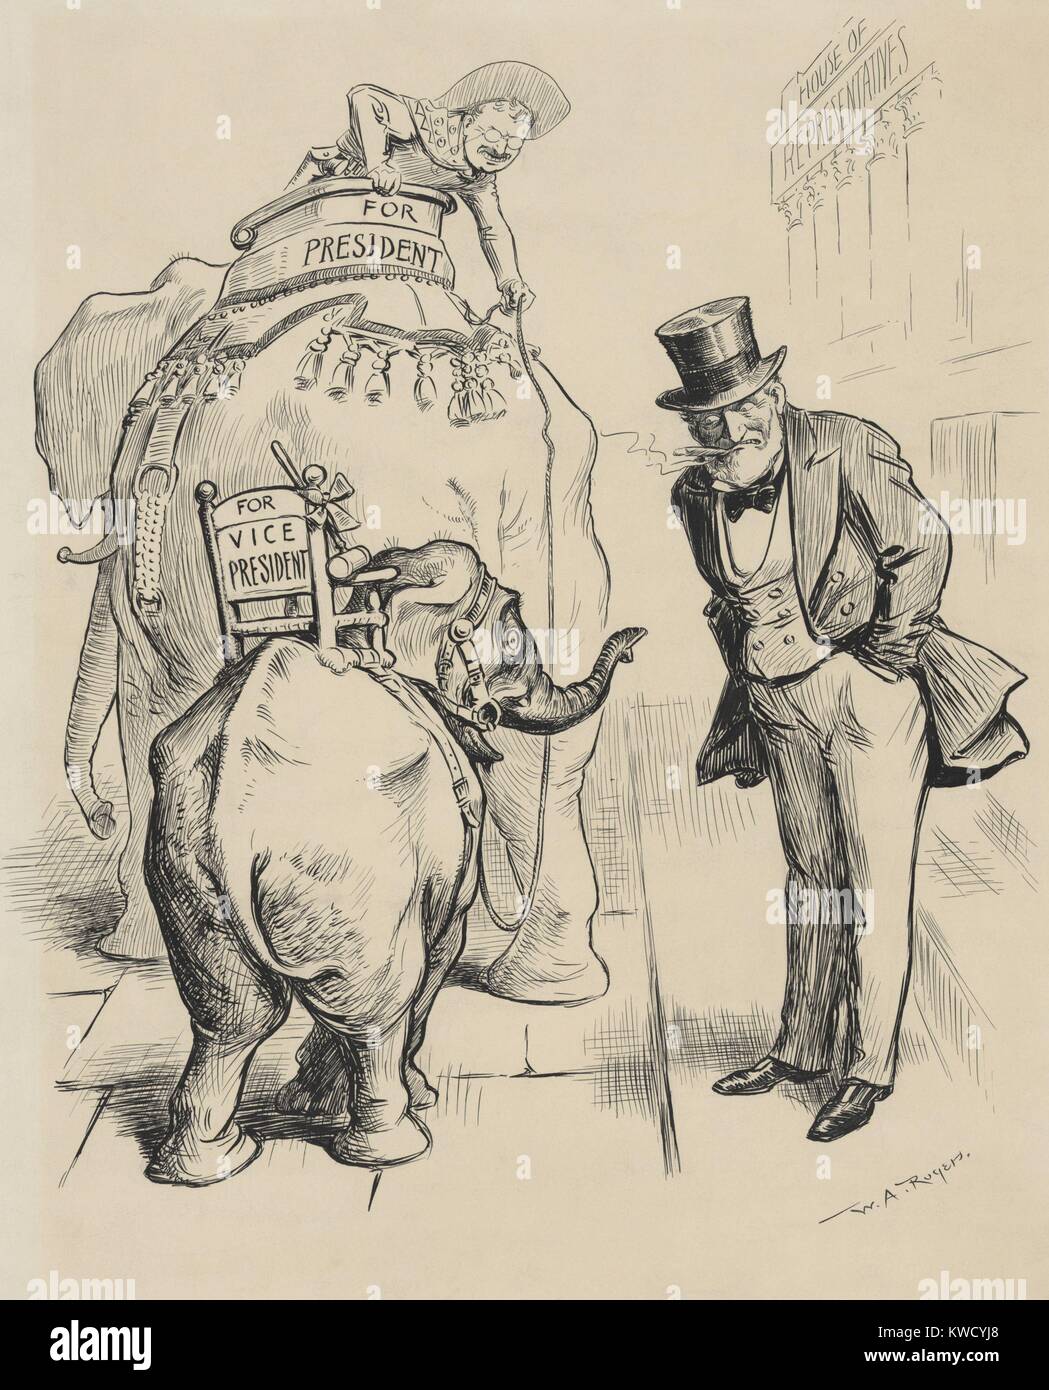 TOO BL--KTY SMALL FOR UNCLE JOE, 1904 cartoon about Cannons rebuff of the Vice Presidency. Theodore Roosevelt on a big elephant, fails to entice Joseph Gurney Cannon, Speaker of the House of Representatives, to be his running mate (BSLOC 2017 6 25) Stock Photo